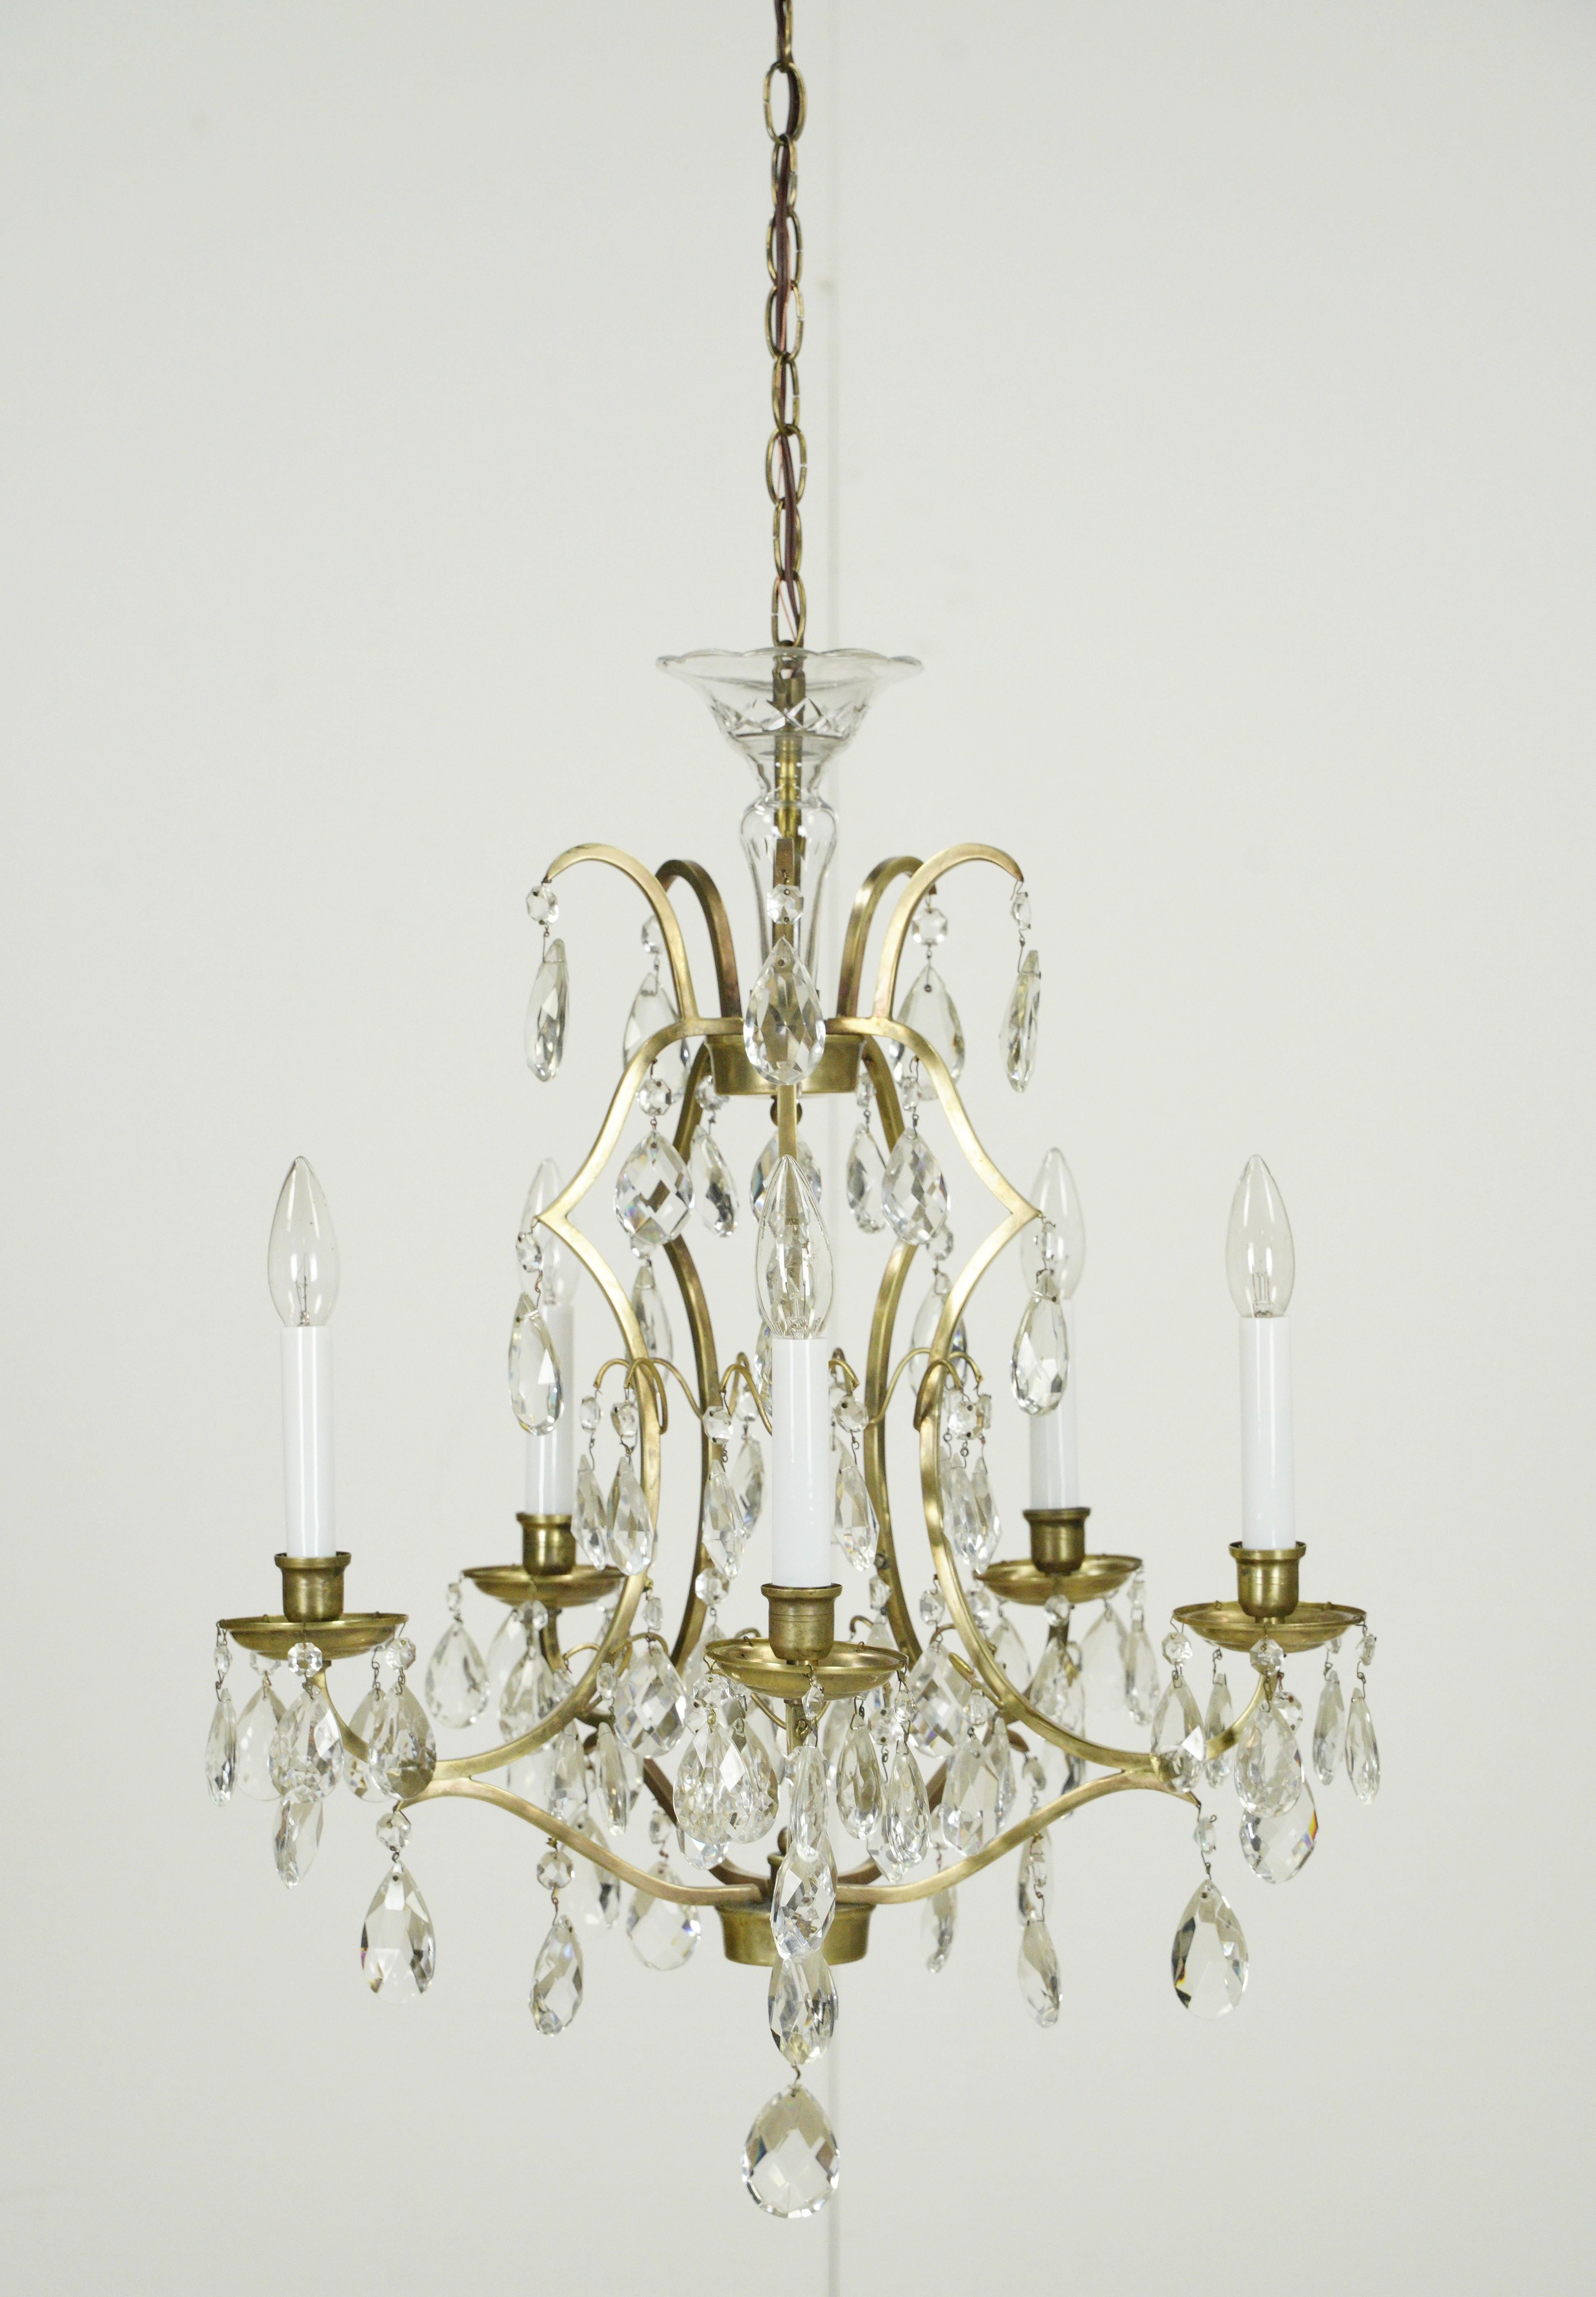 Waldorf Astoria Hotel 5 Arm Crystal & Brass Chandelier In Good Condition For Sale In New York, NY